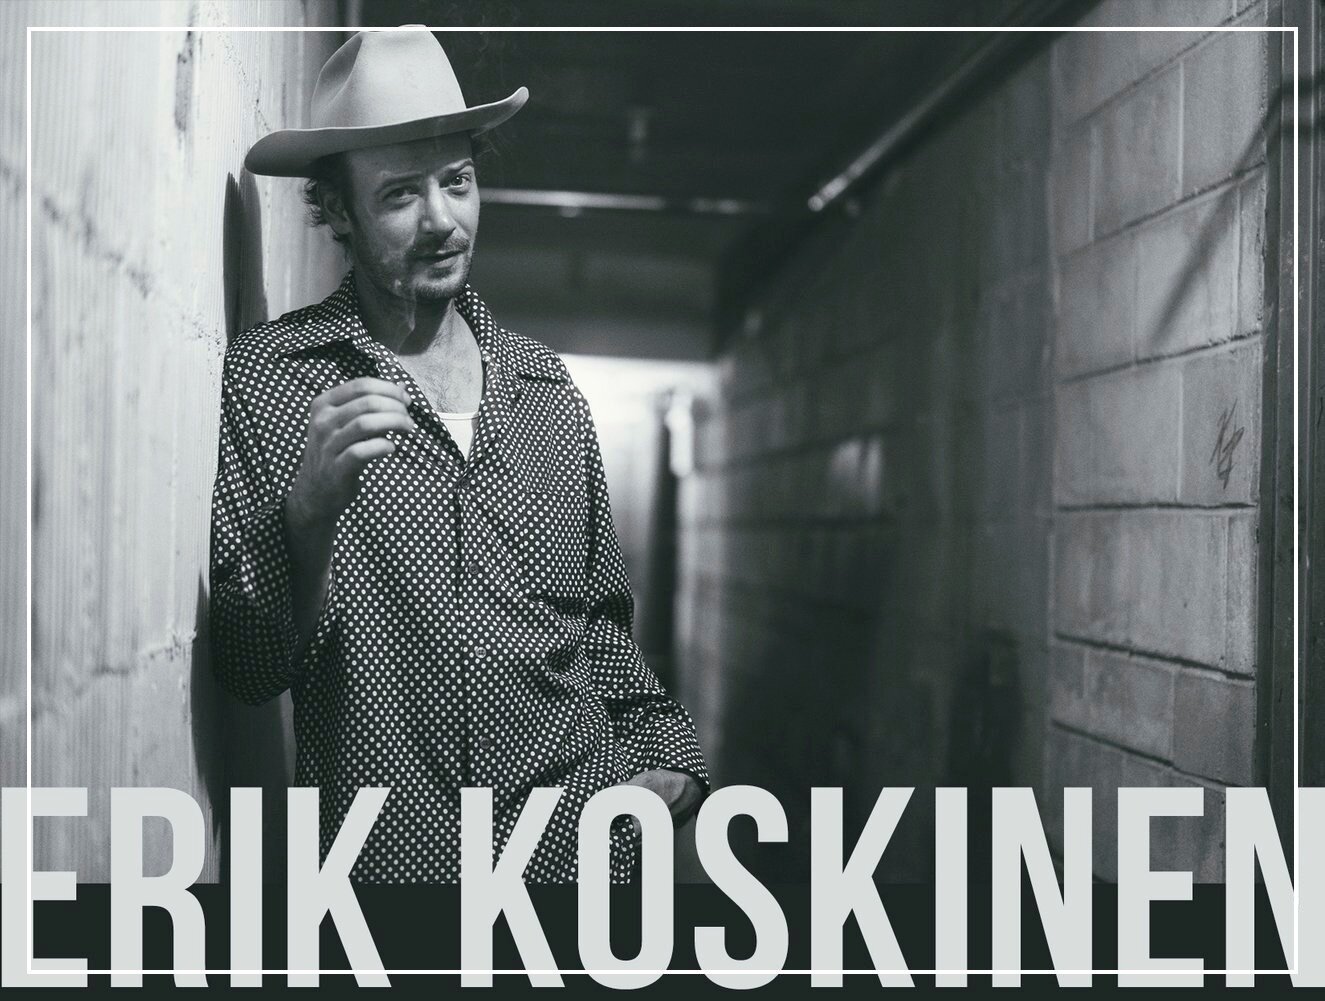 ERIK KOSKINEN joins us at The Ripple Center as part of our Mennesota Fest celebration of Minnesota male artists APR 21! Our Q &amp; A session will give you a glimpse into Erik's world as a singer/songwriter. Take advantage of two workshops to choose 